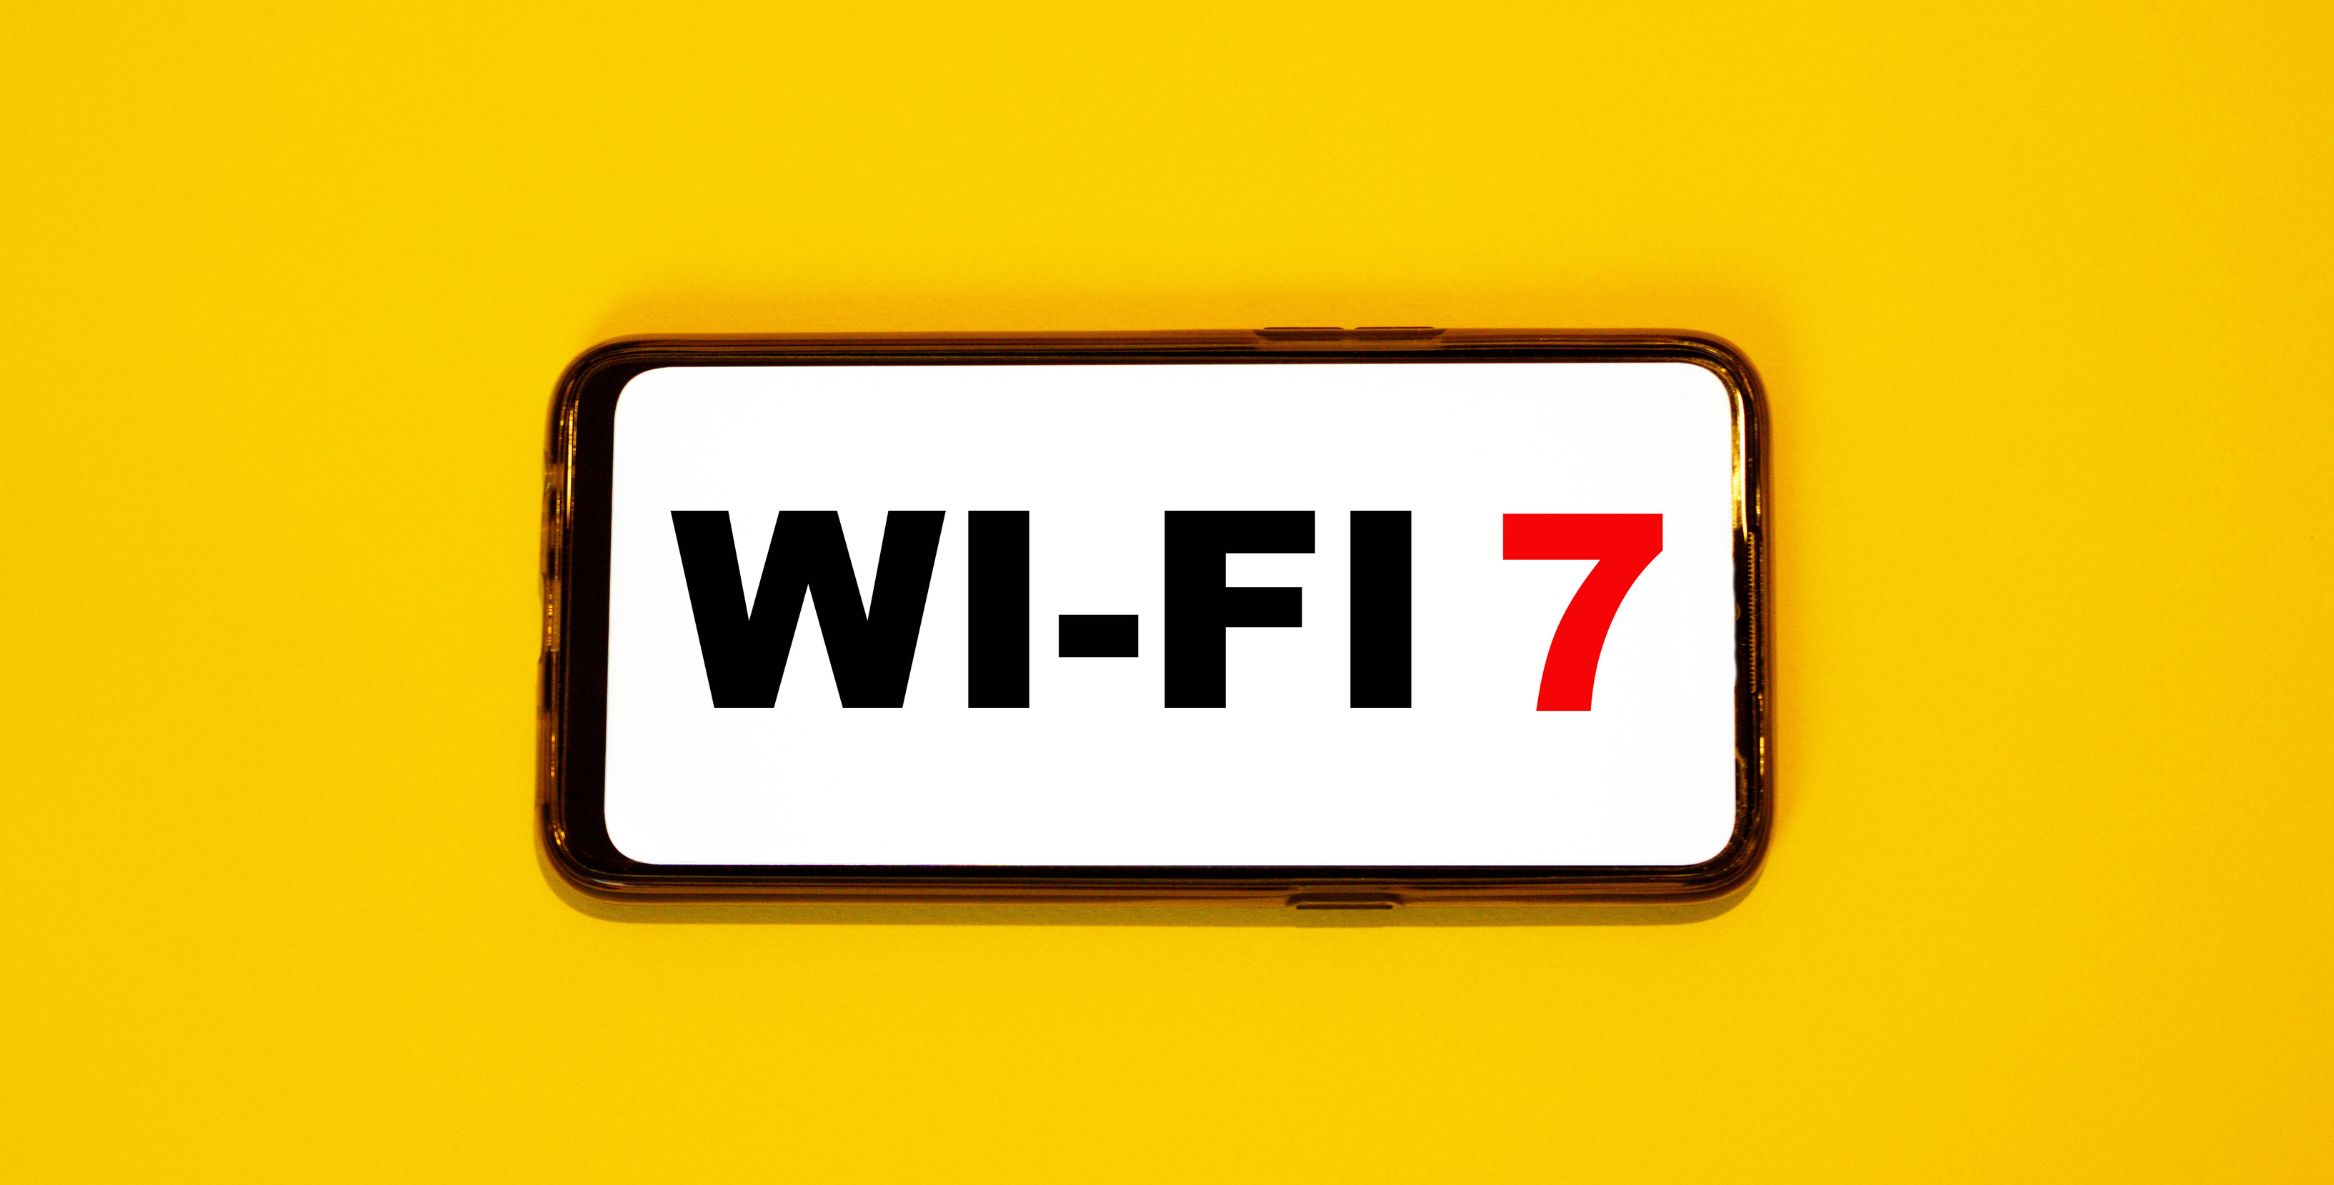 What is Wi Fi 7 cnv